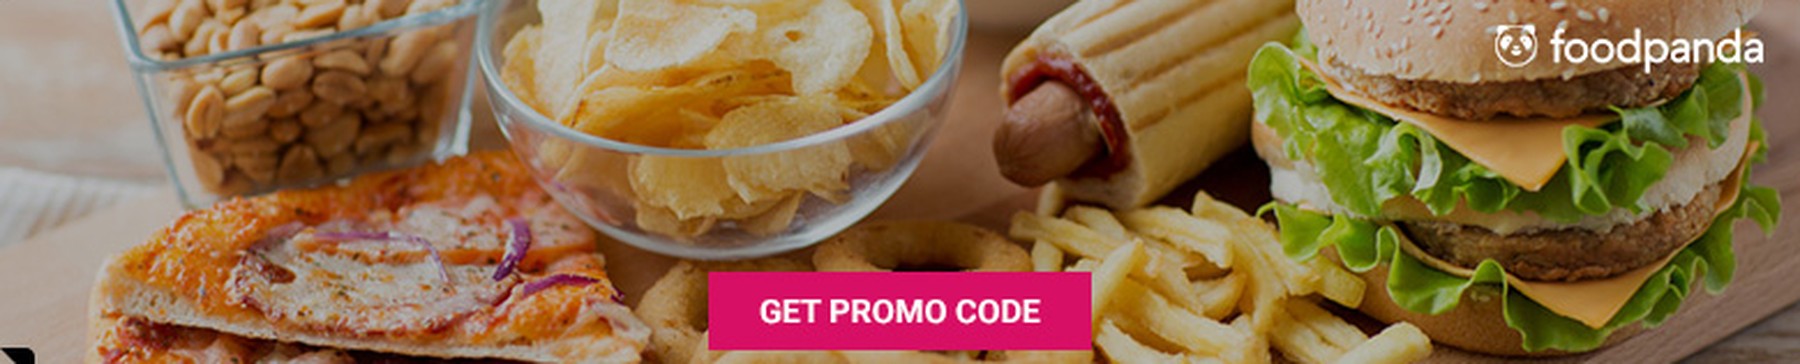 Hungry? Check out FoodPanda promo codes too!